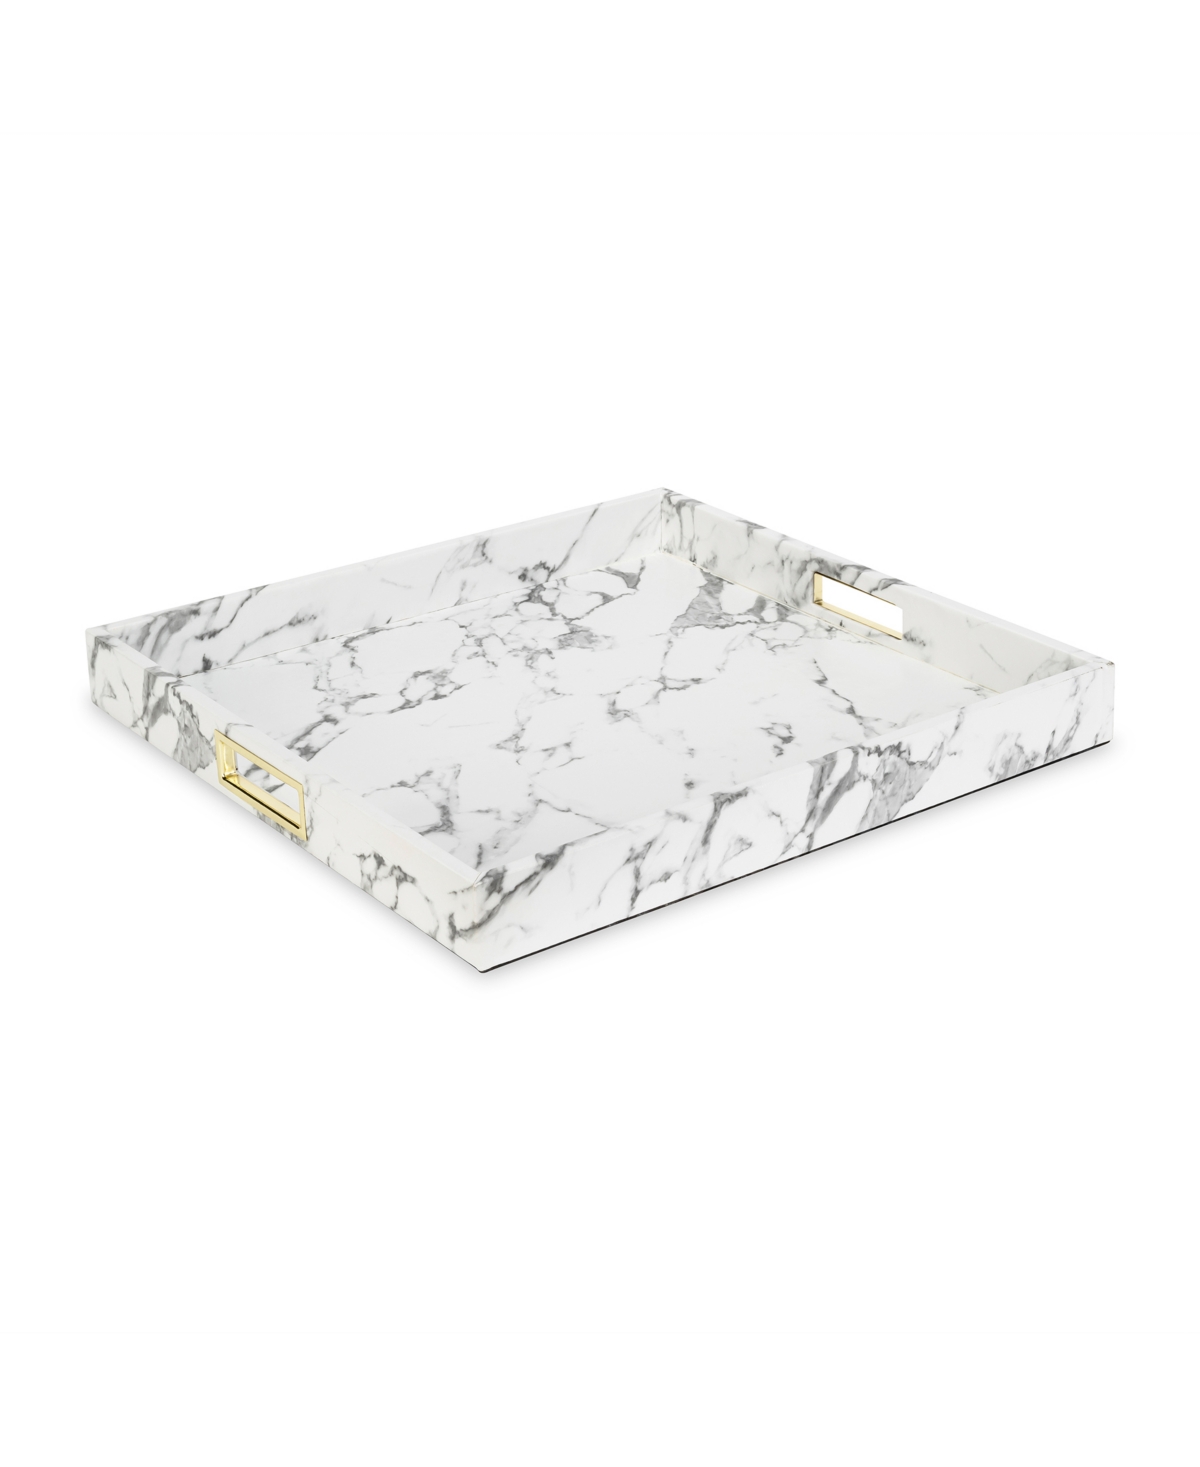 American Atelier Marble With Gold-tone Stainless Steel Handles Tray In White